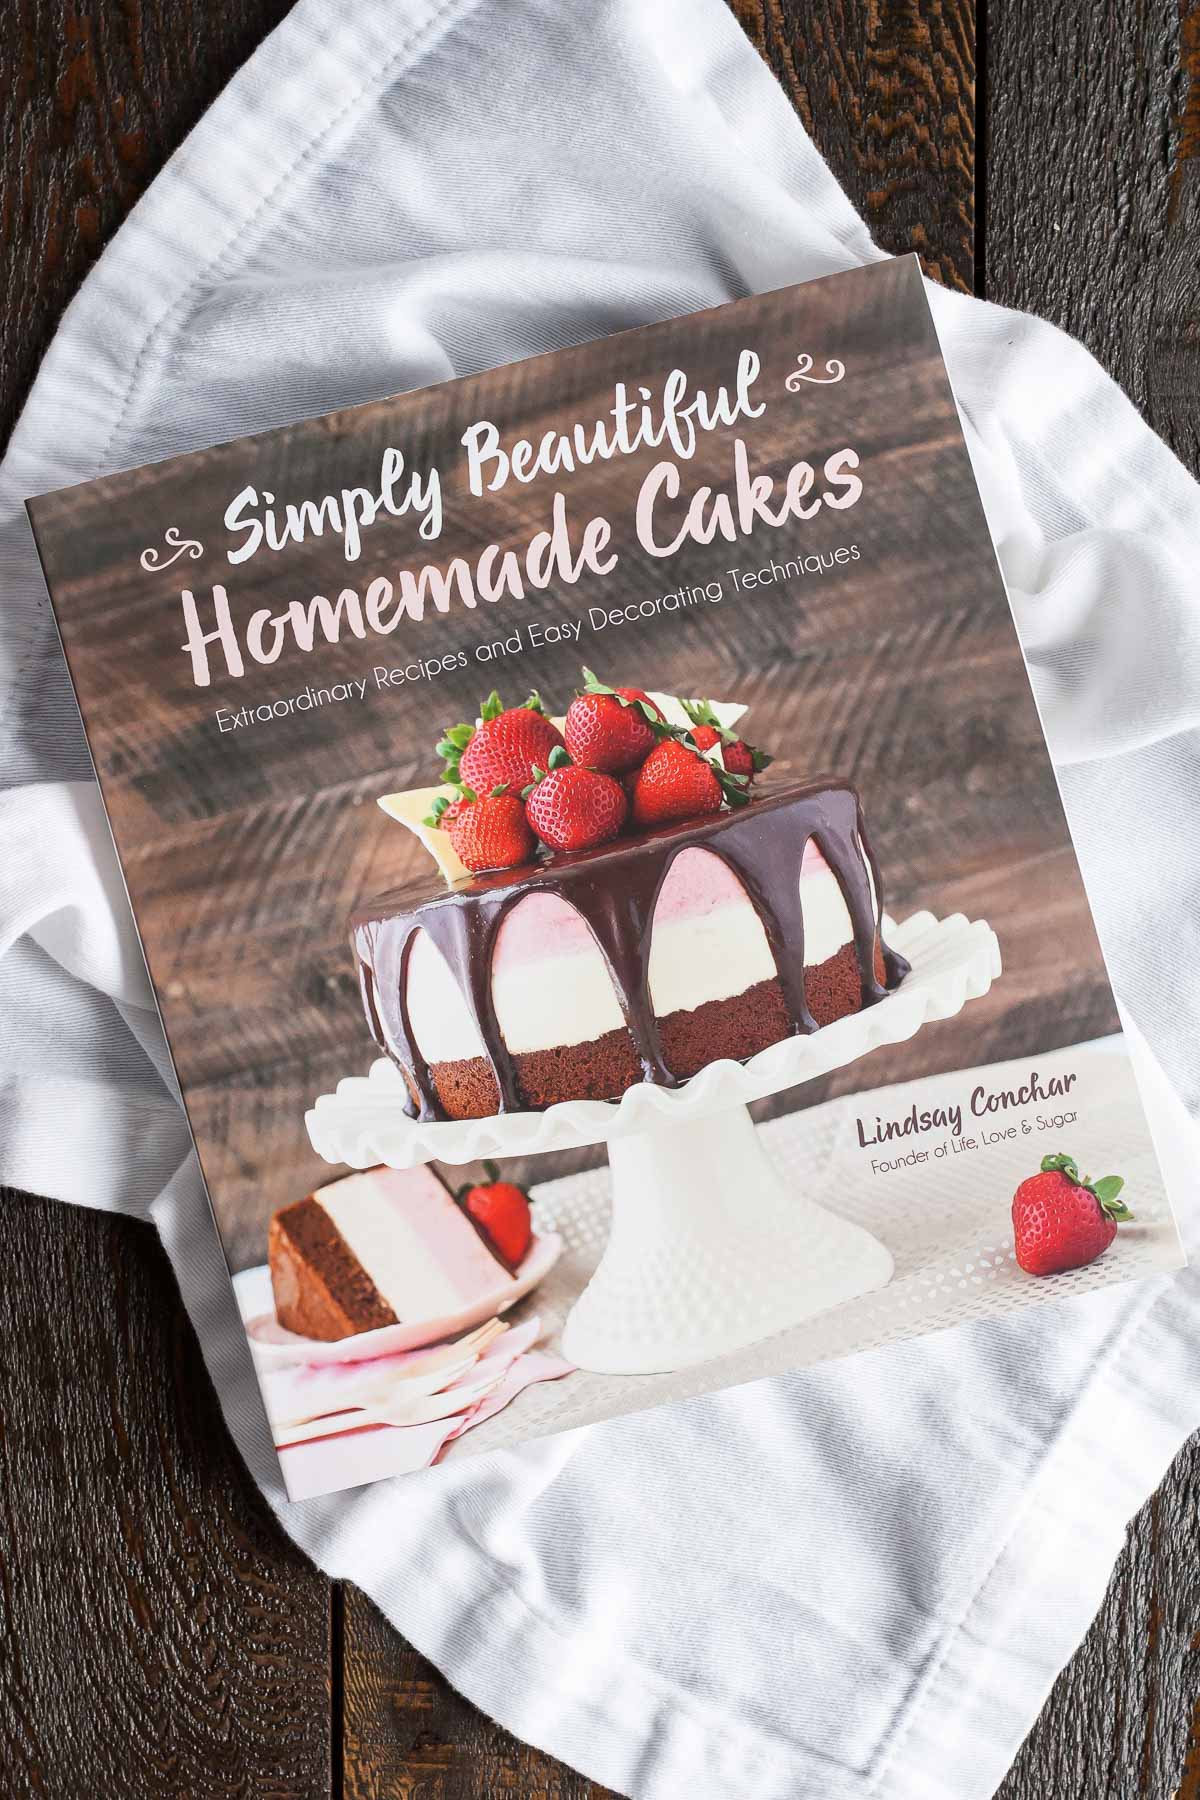 Photo of the Simply Beautiful Homemade Cakes book.